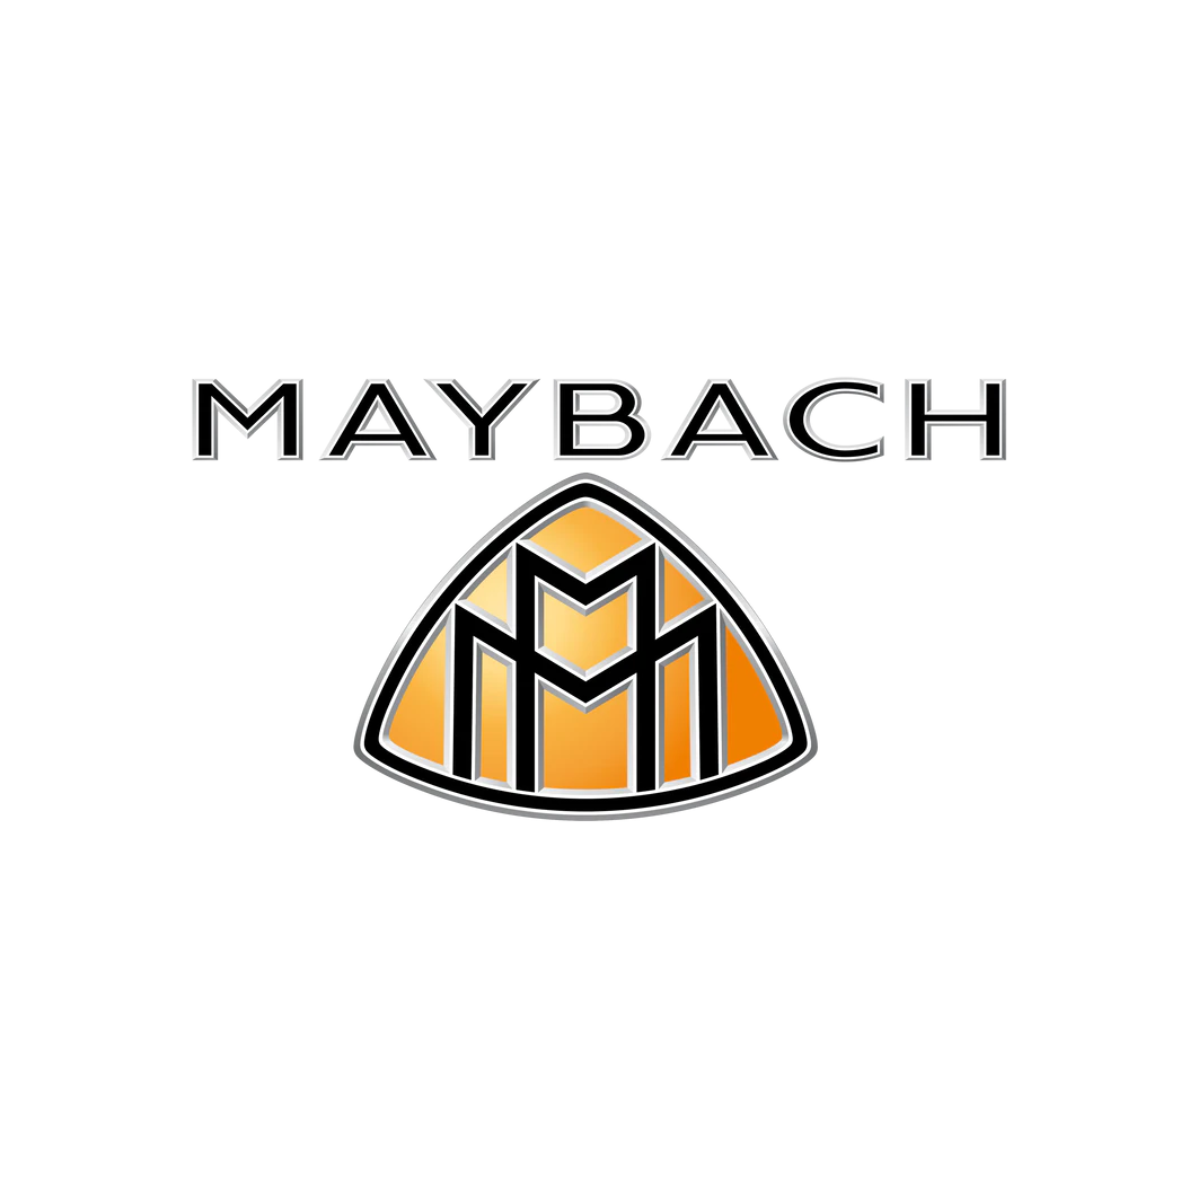 "Elevate your style with Maybach Eyewear for men and women at Optorium. Explore our premium collection of luxury Maybach sunglasses, opticals, lenses, contact lenses, aviators, and glasses to make a statement."